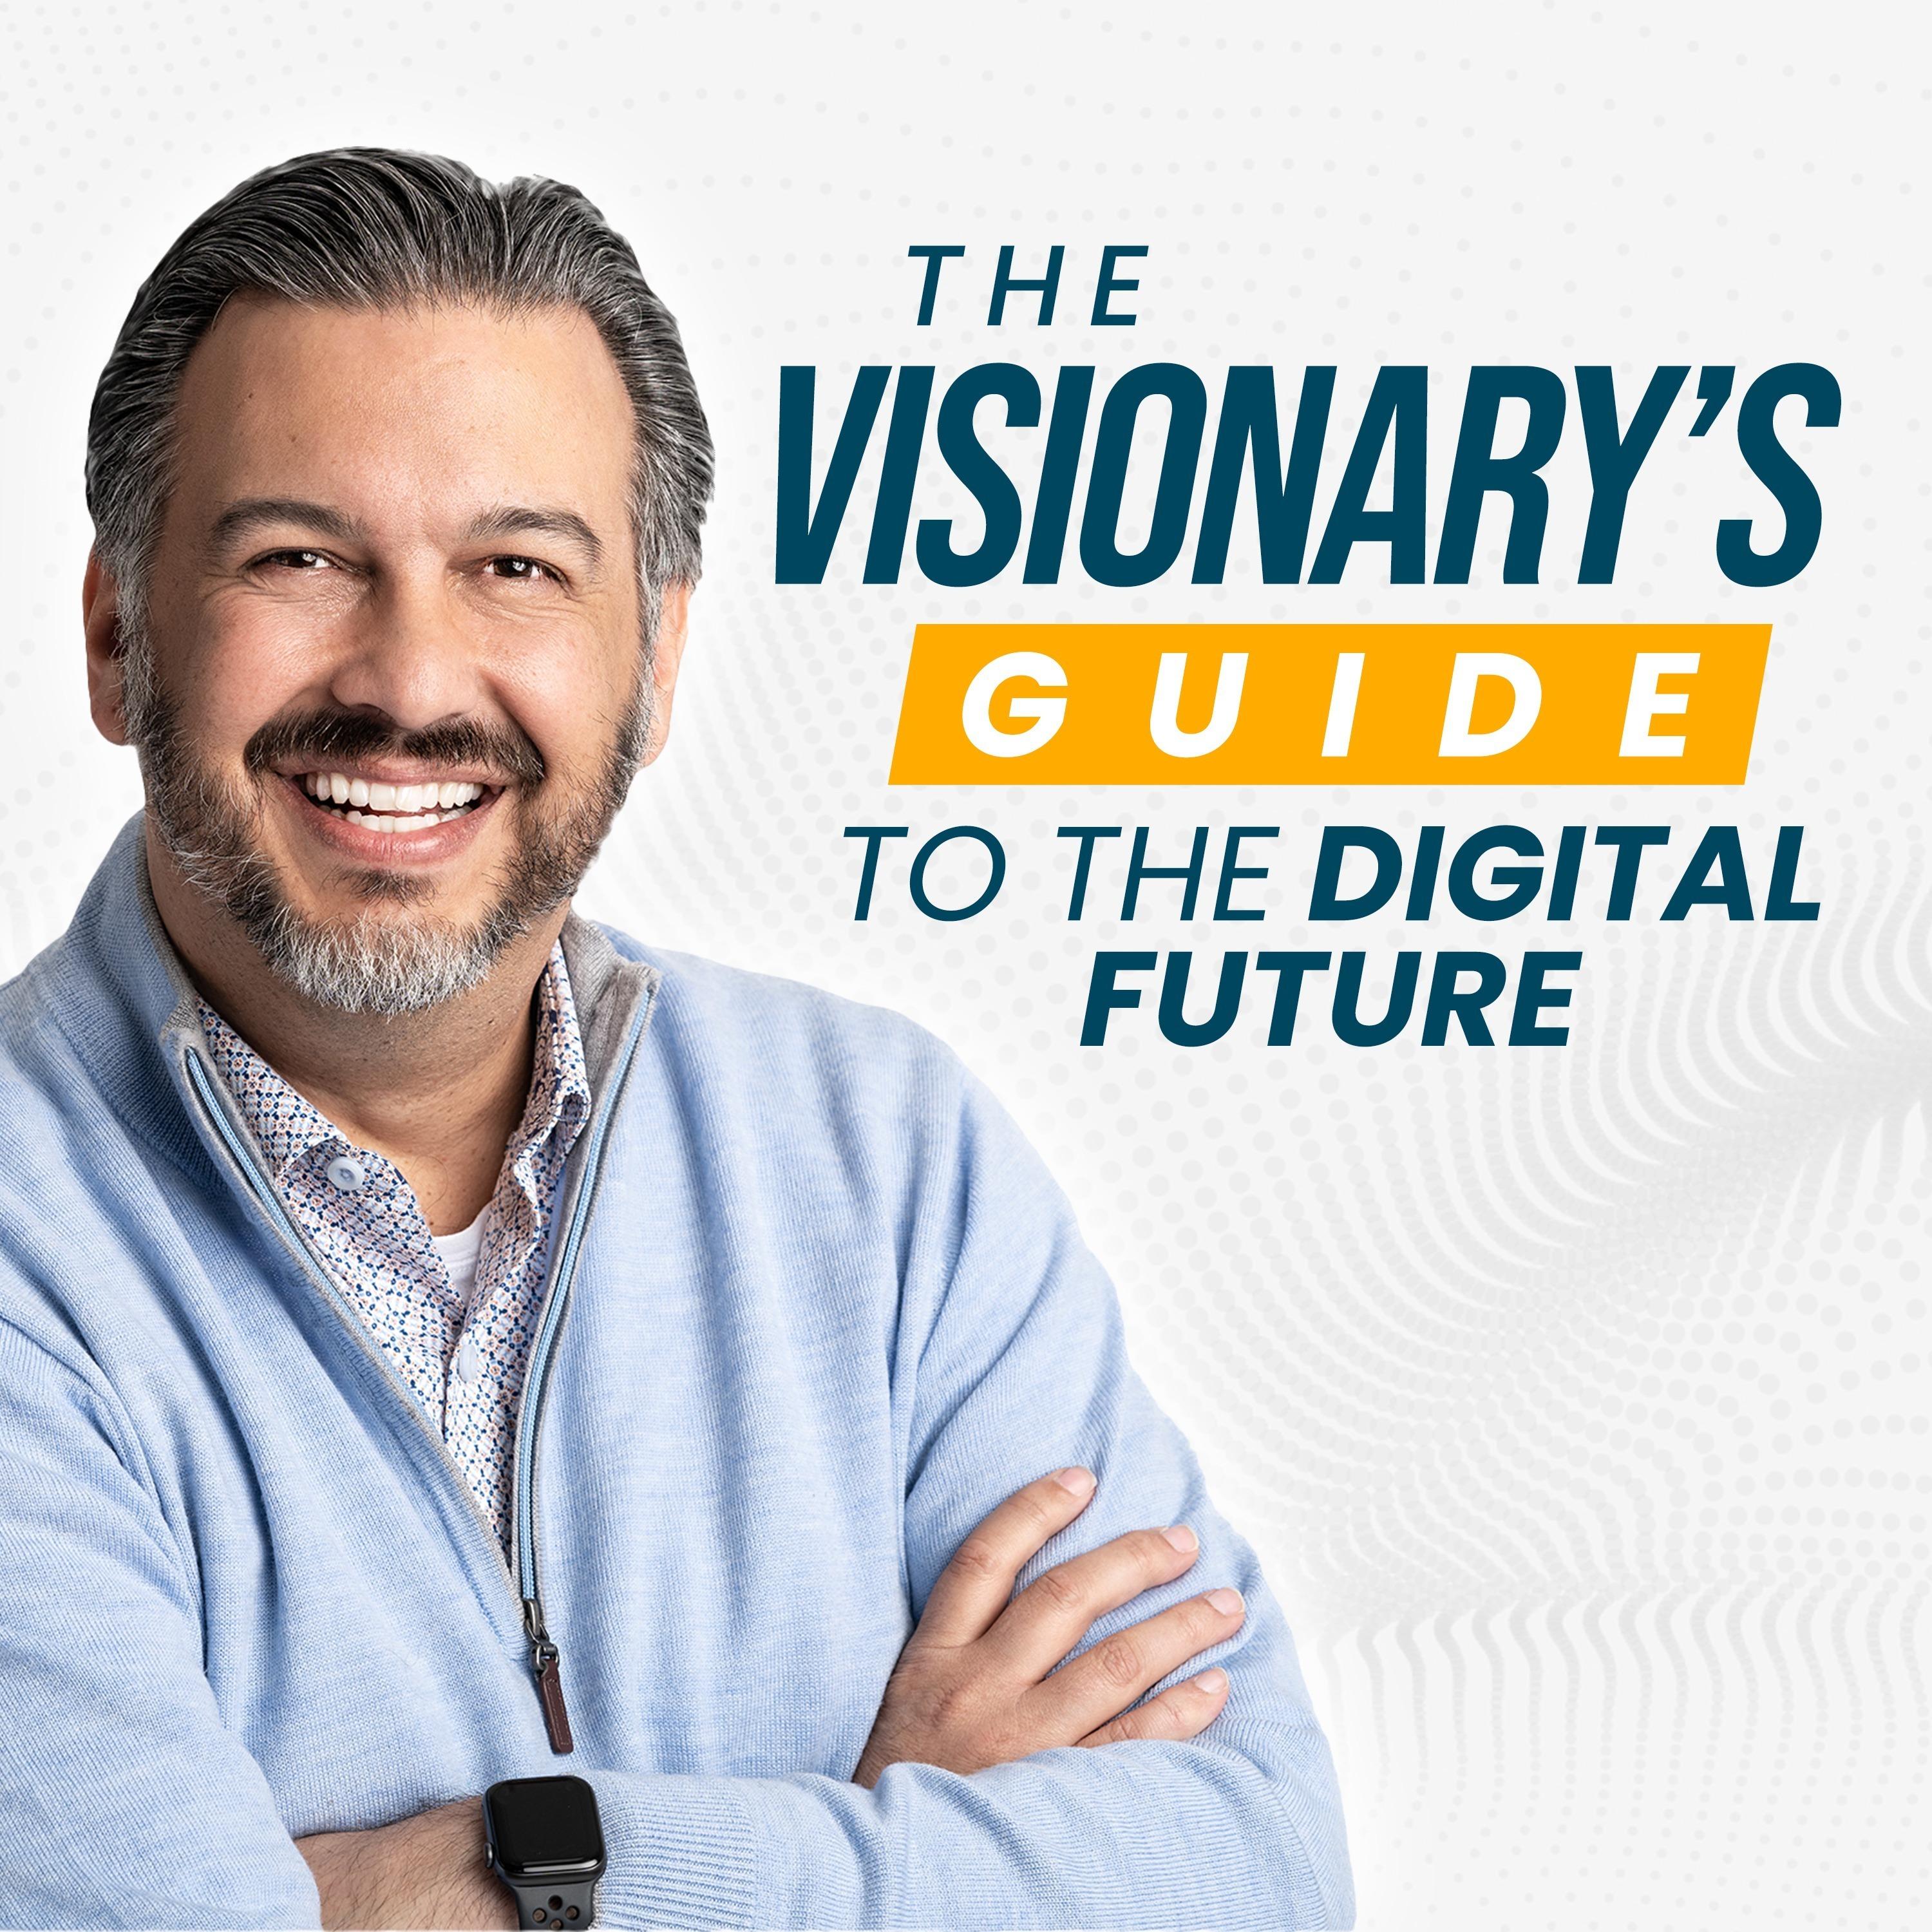 The Visionary's Guide to the Digital Future